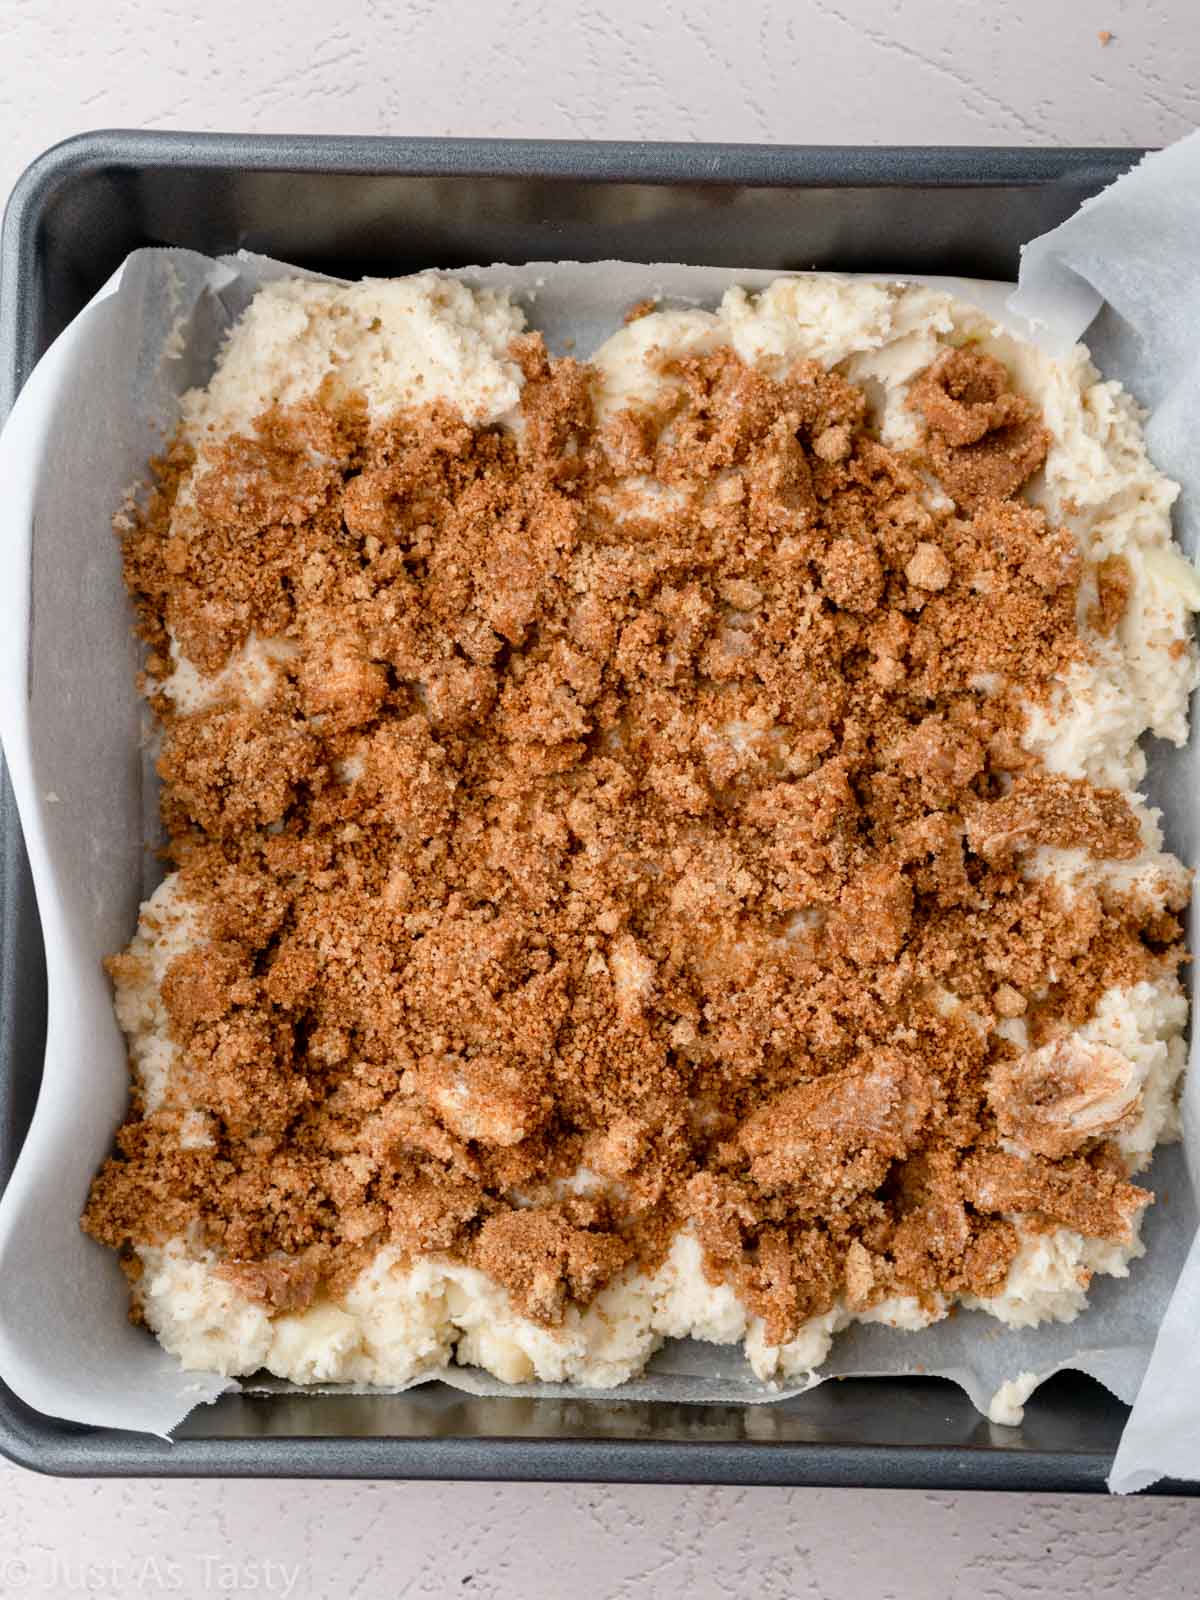 Cake batter topped with cinnamon topping in a square pan.